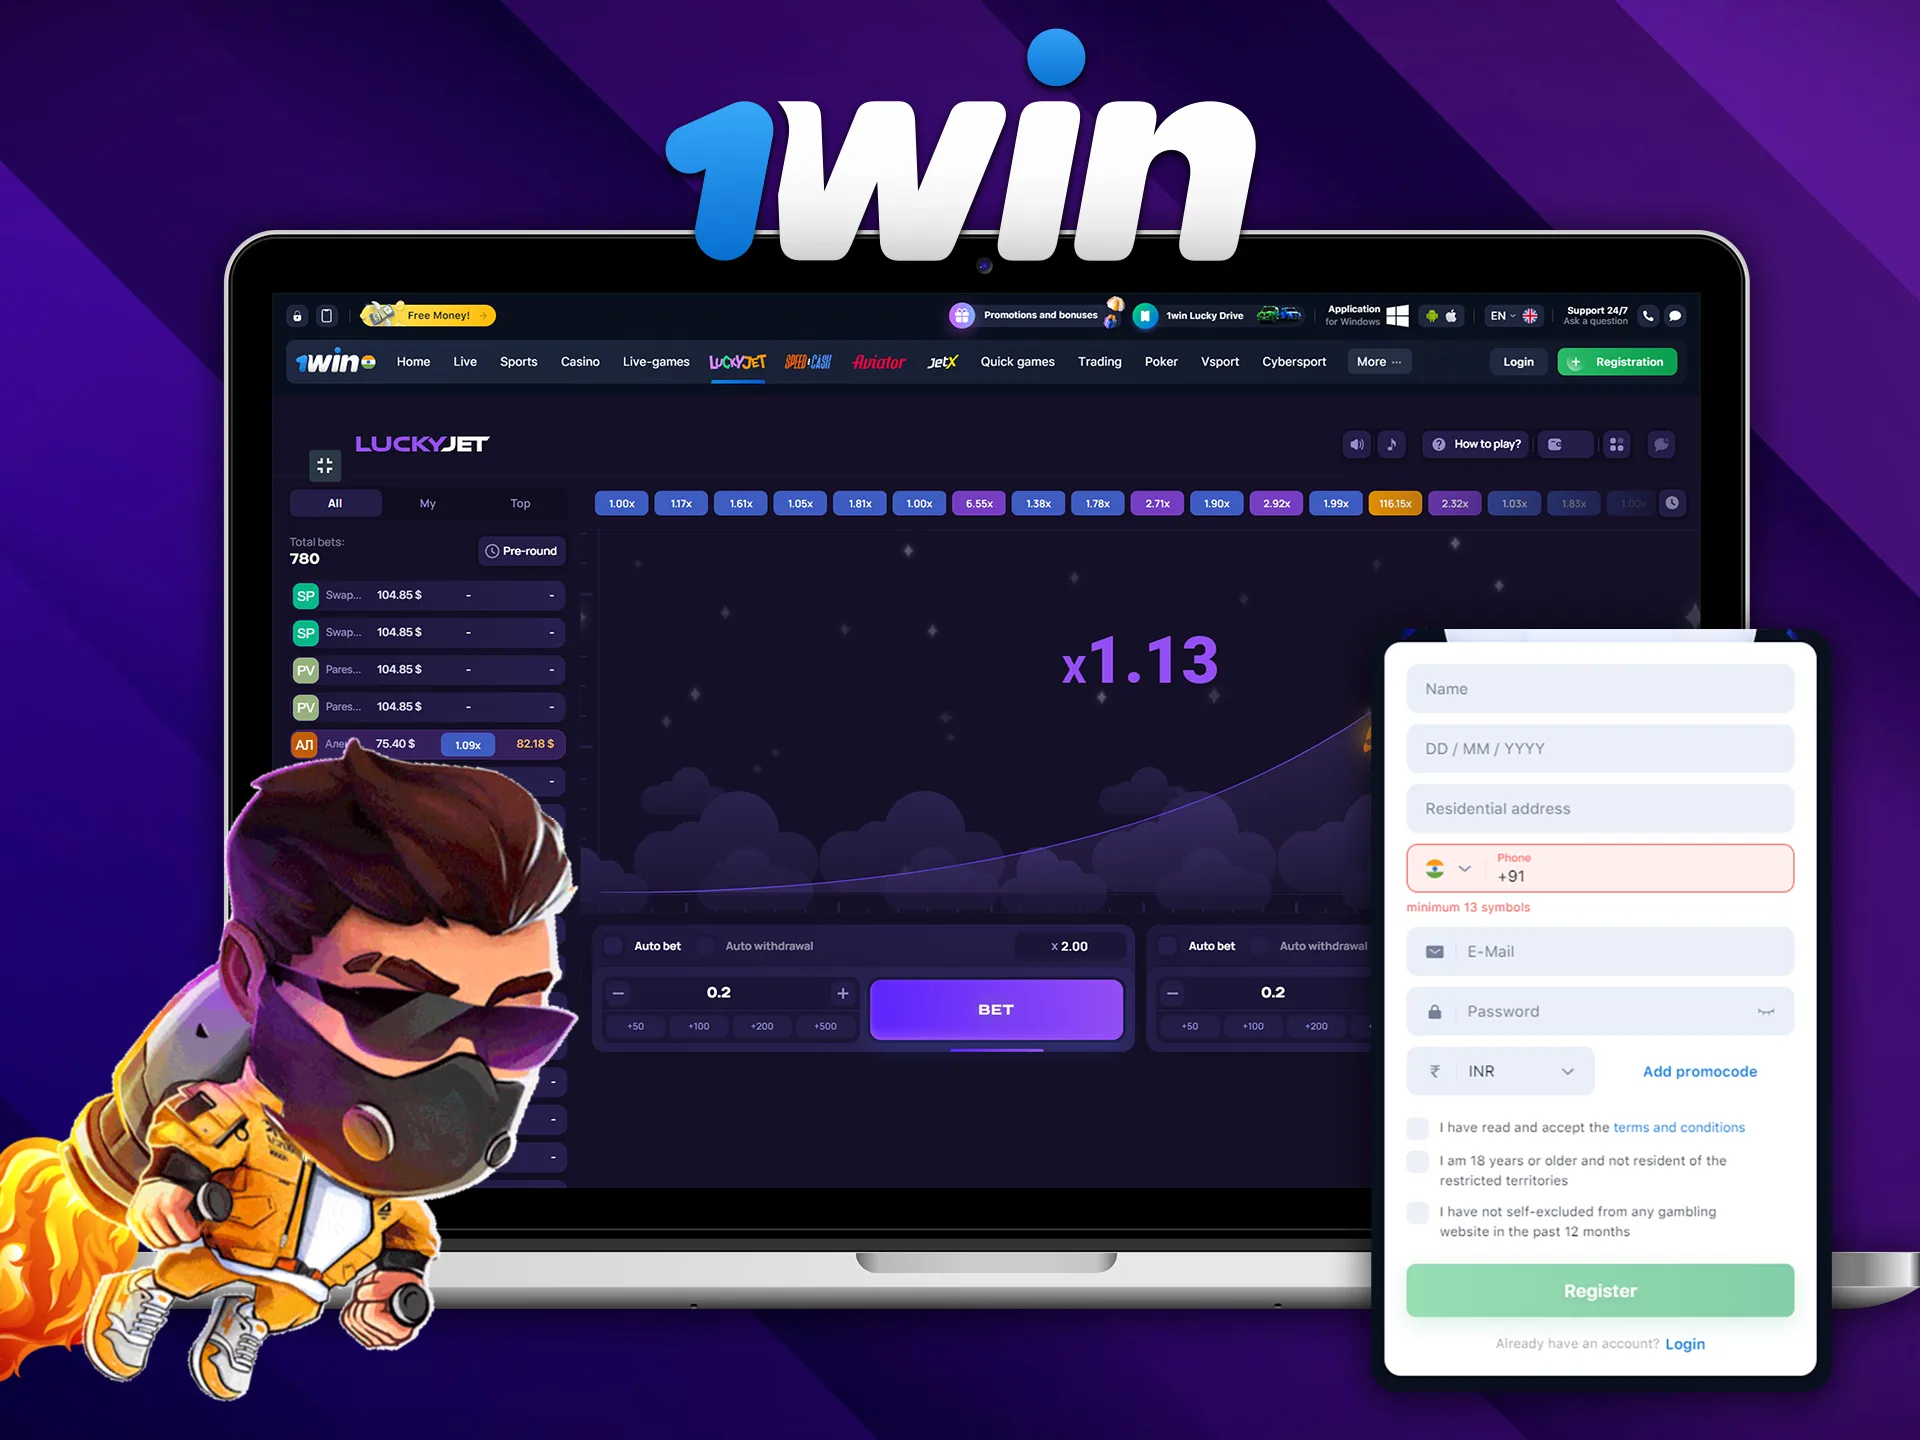 To start playing at 1Win Lucky Jet create an account and make your first deposit.